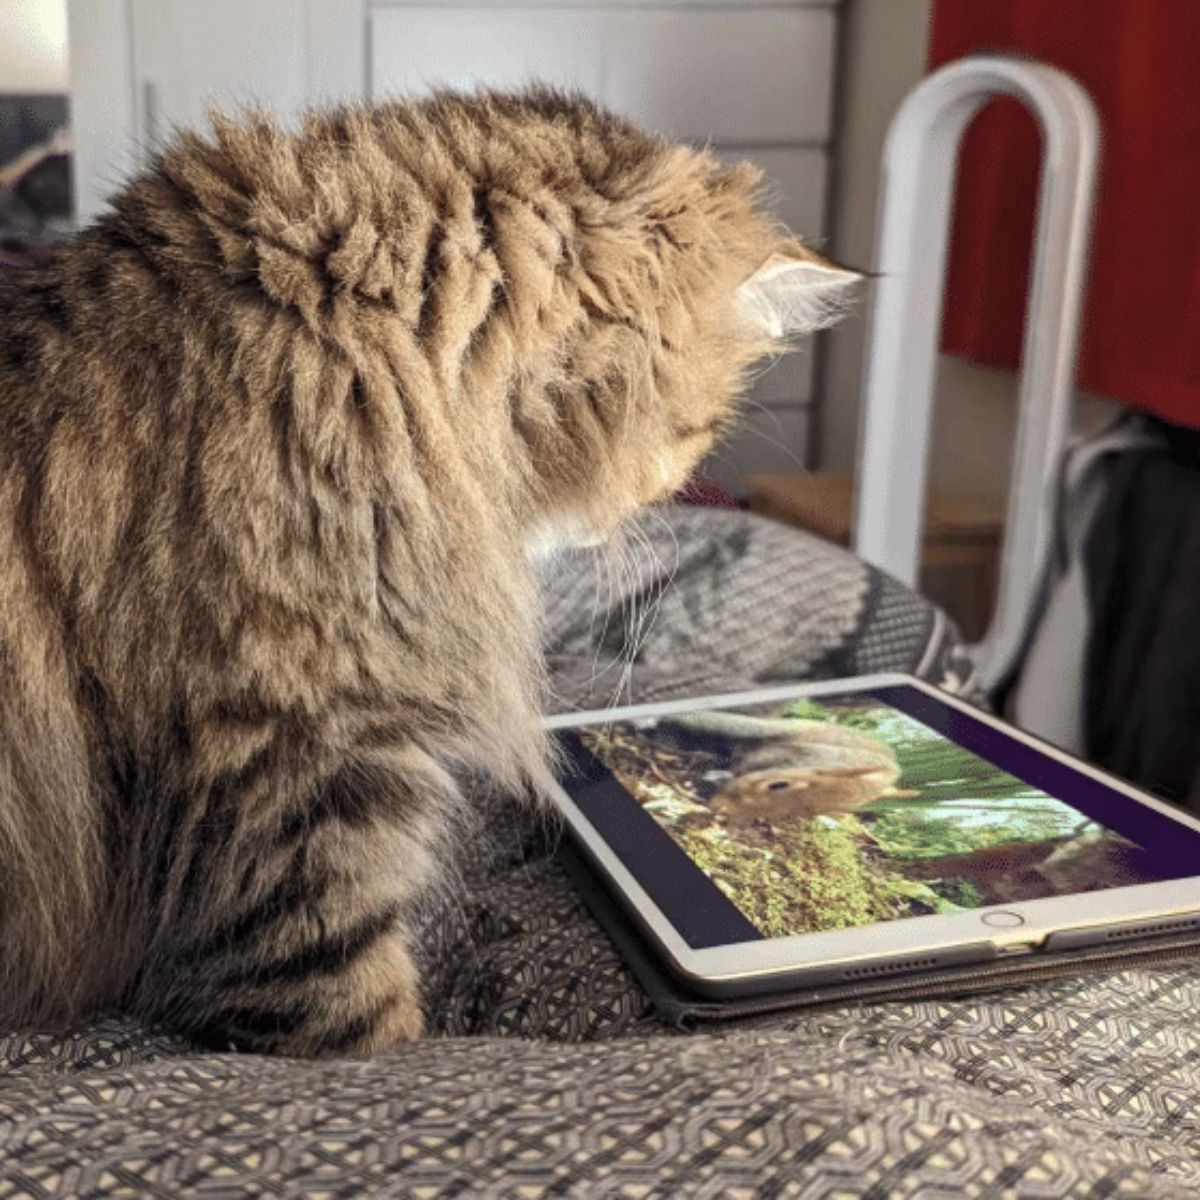 cat looking at tablet